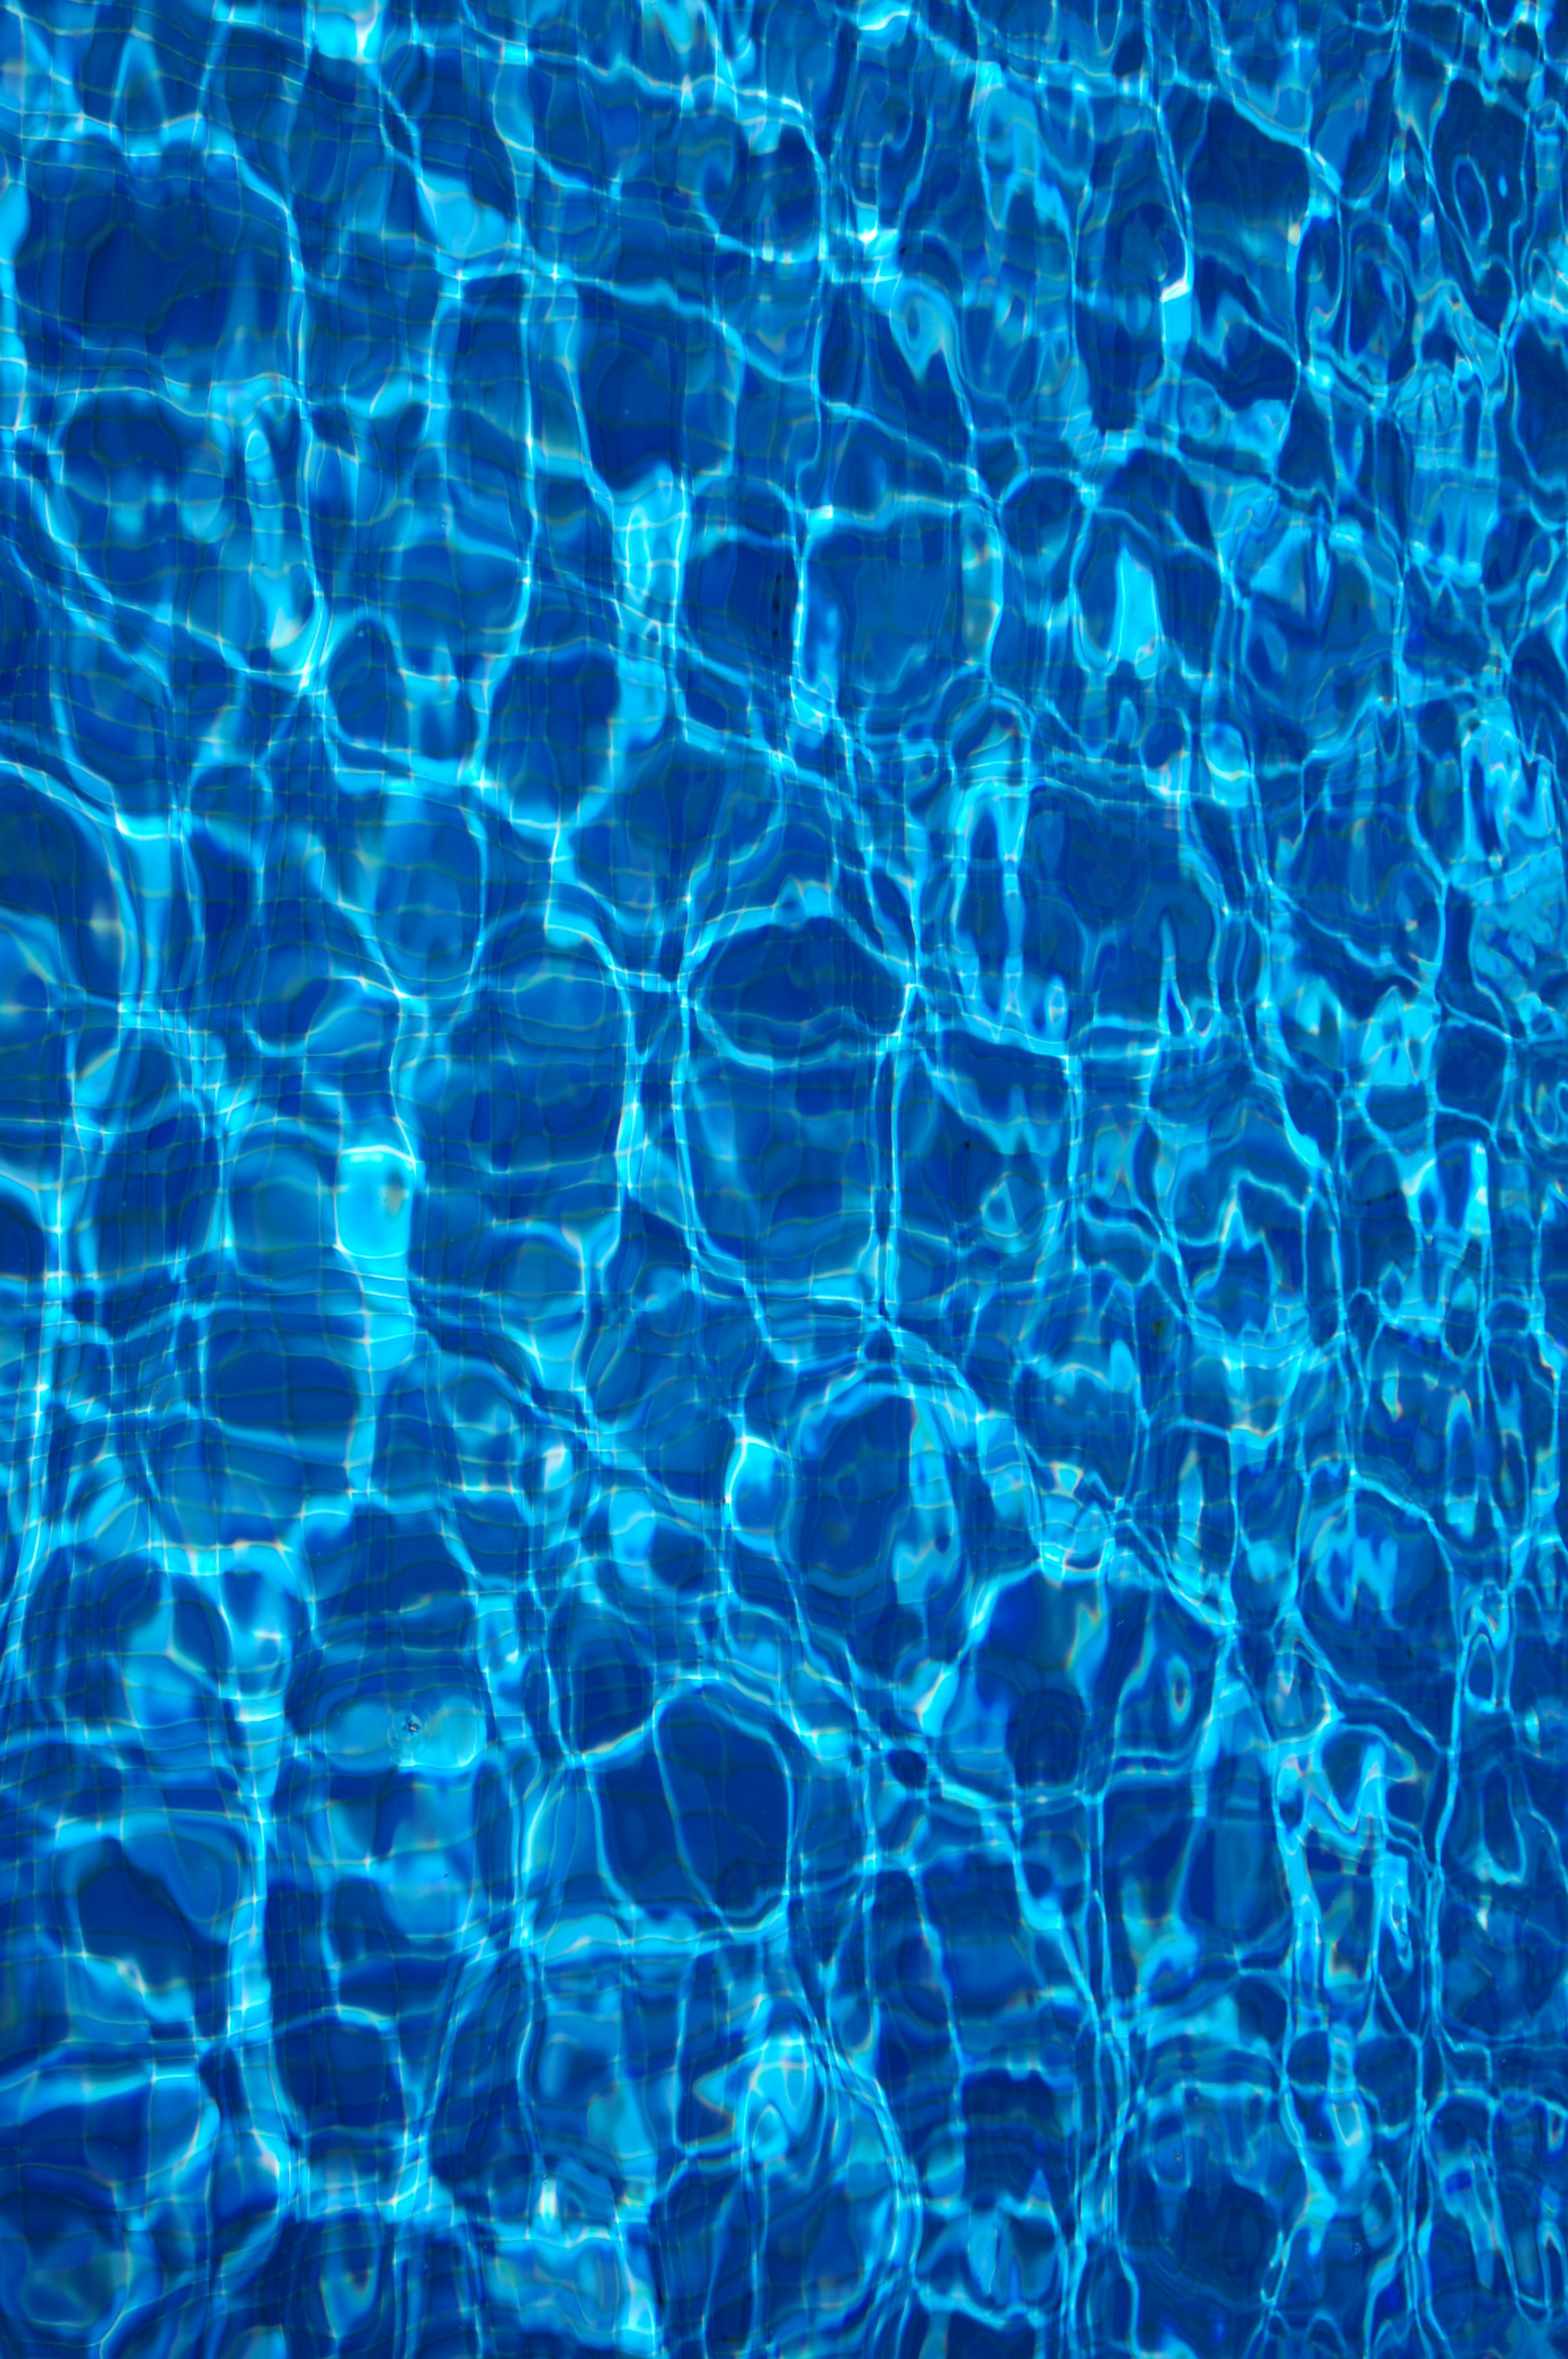 surface, blue, textures, water, transparent, ripples, ripple, texture, pool